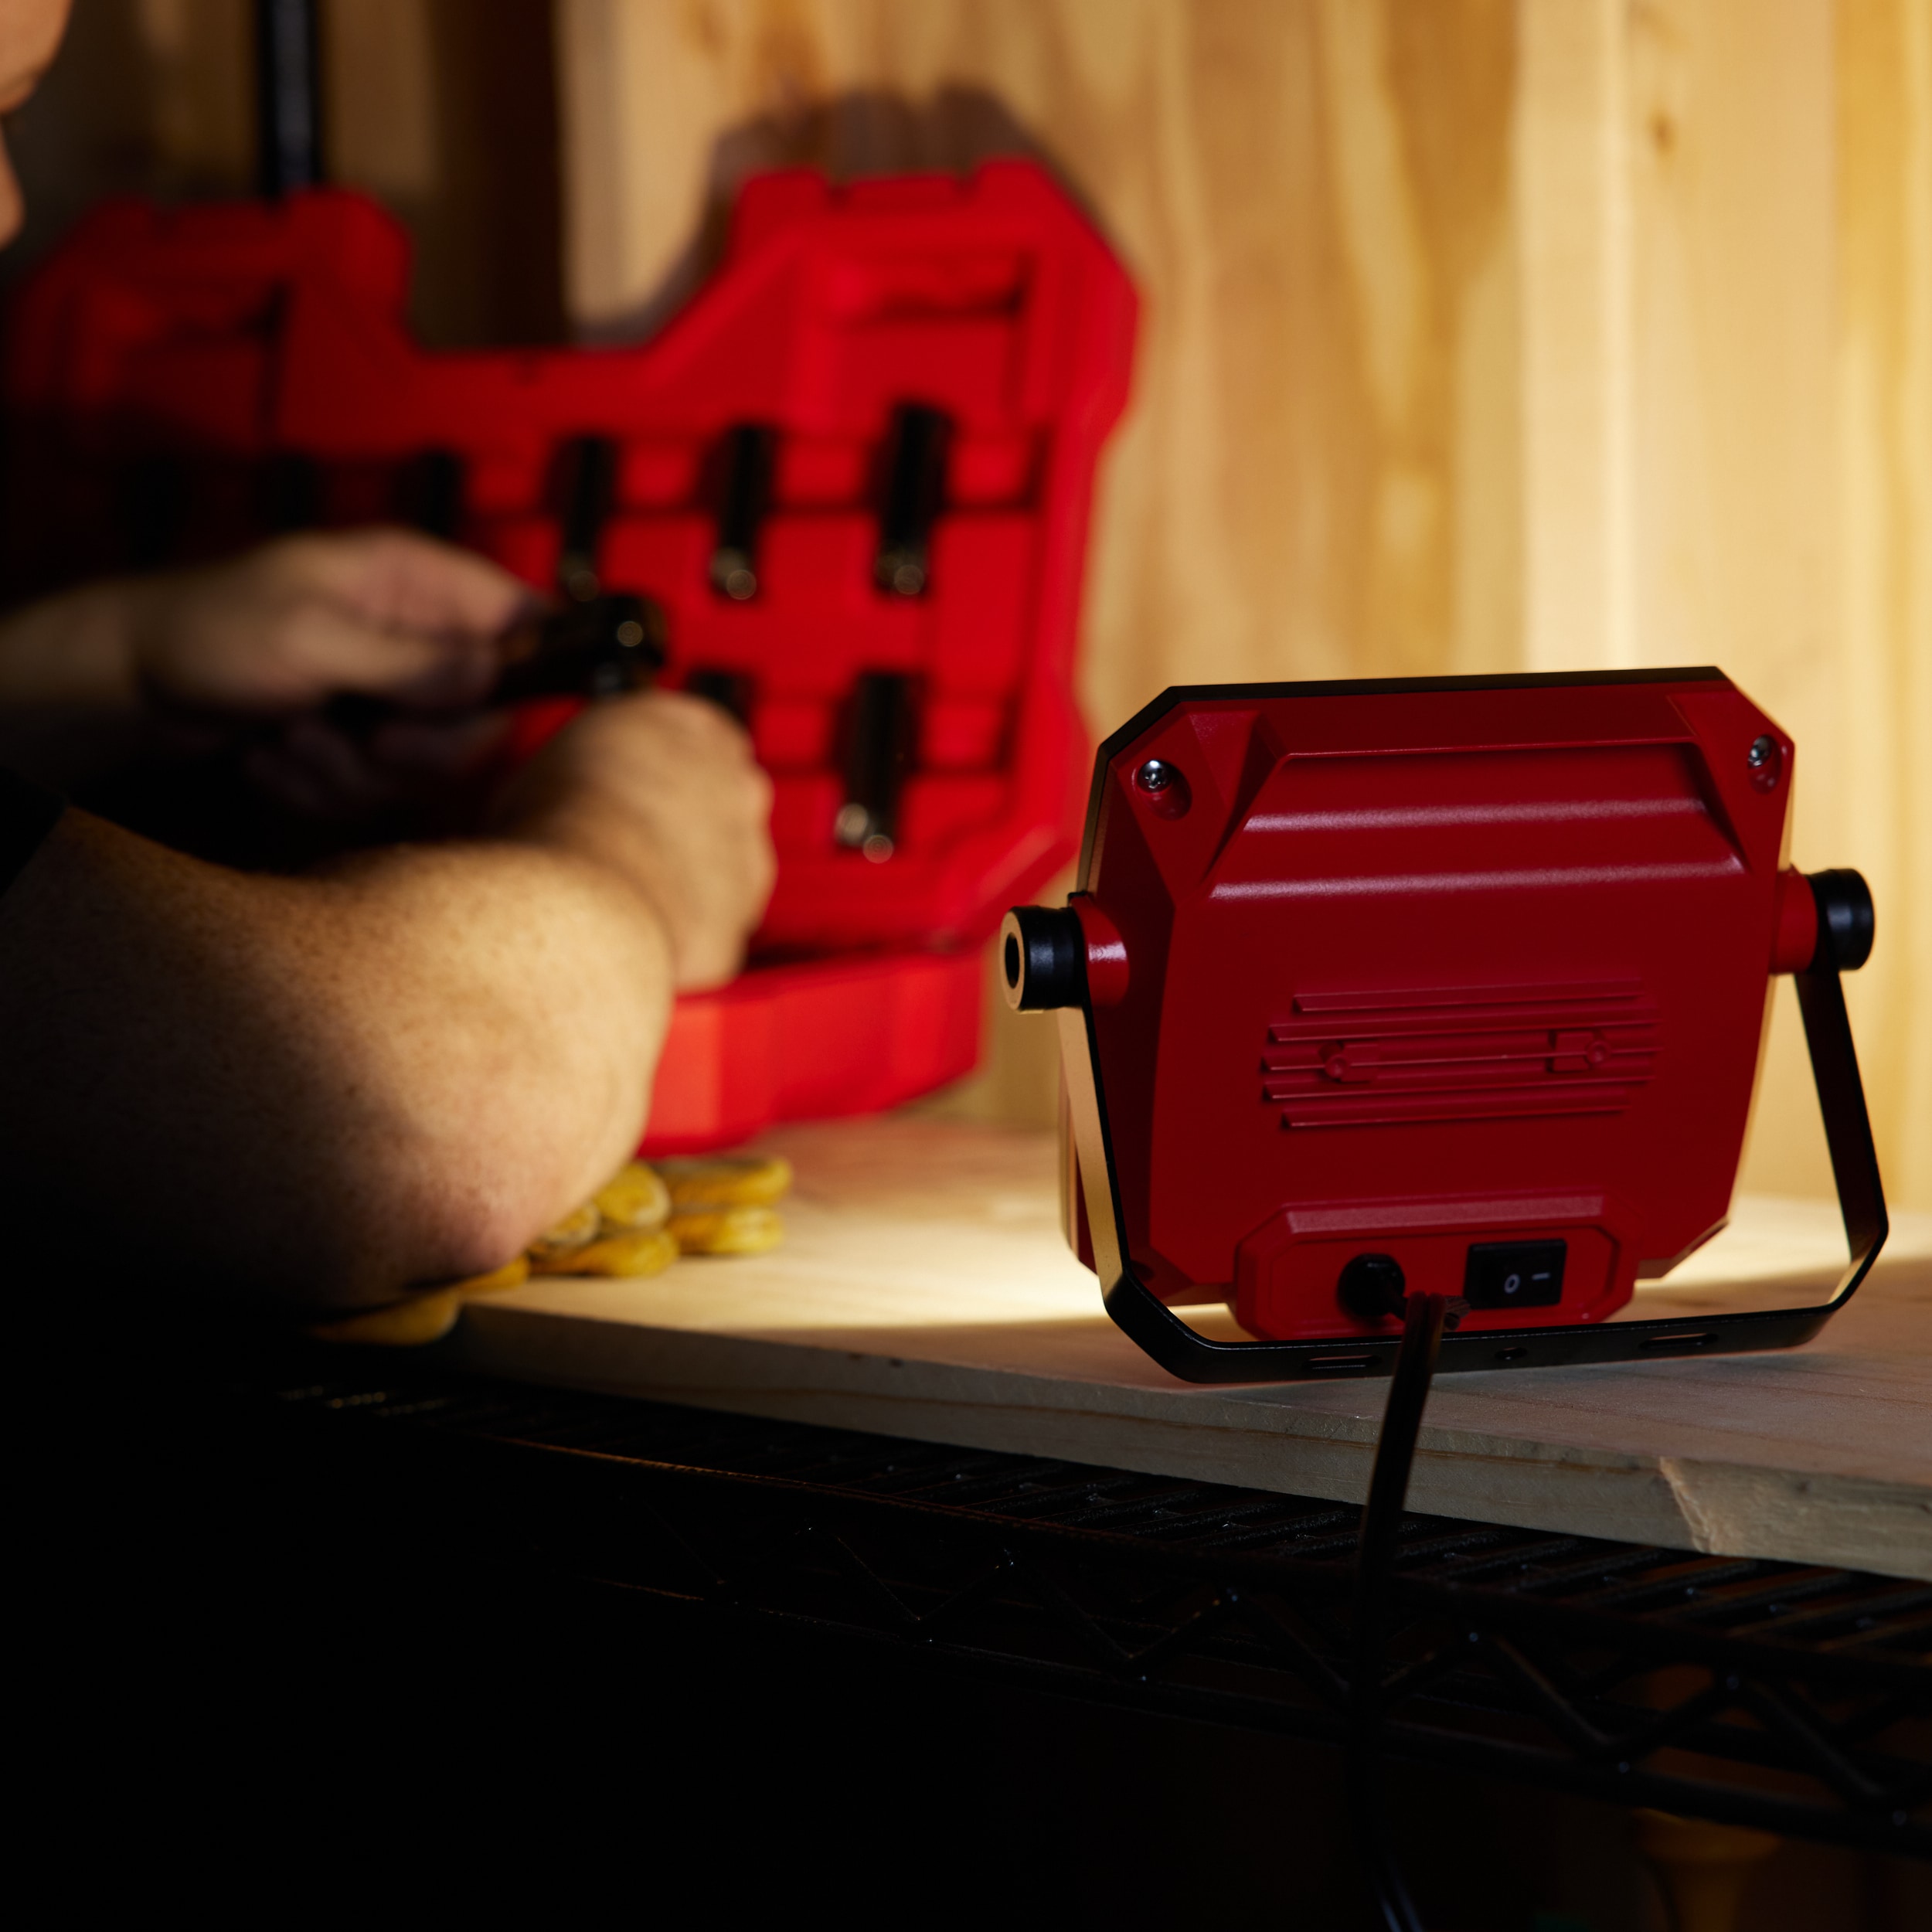 CRAFTSMAN 1500-Lumen LED Red Battery-operated Rechargeable Portable Work  Light in the Work Lights department at